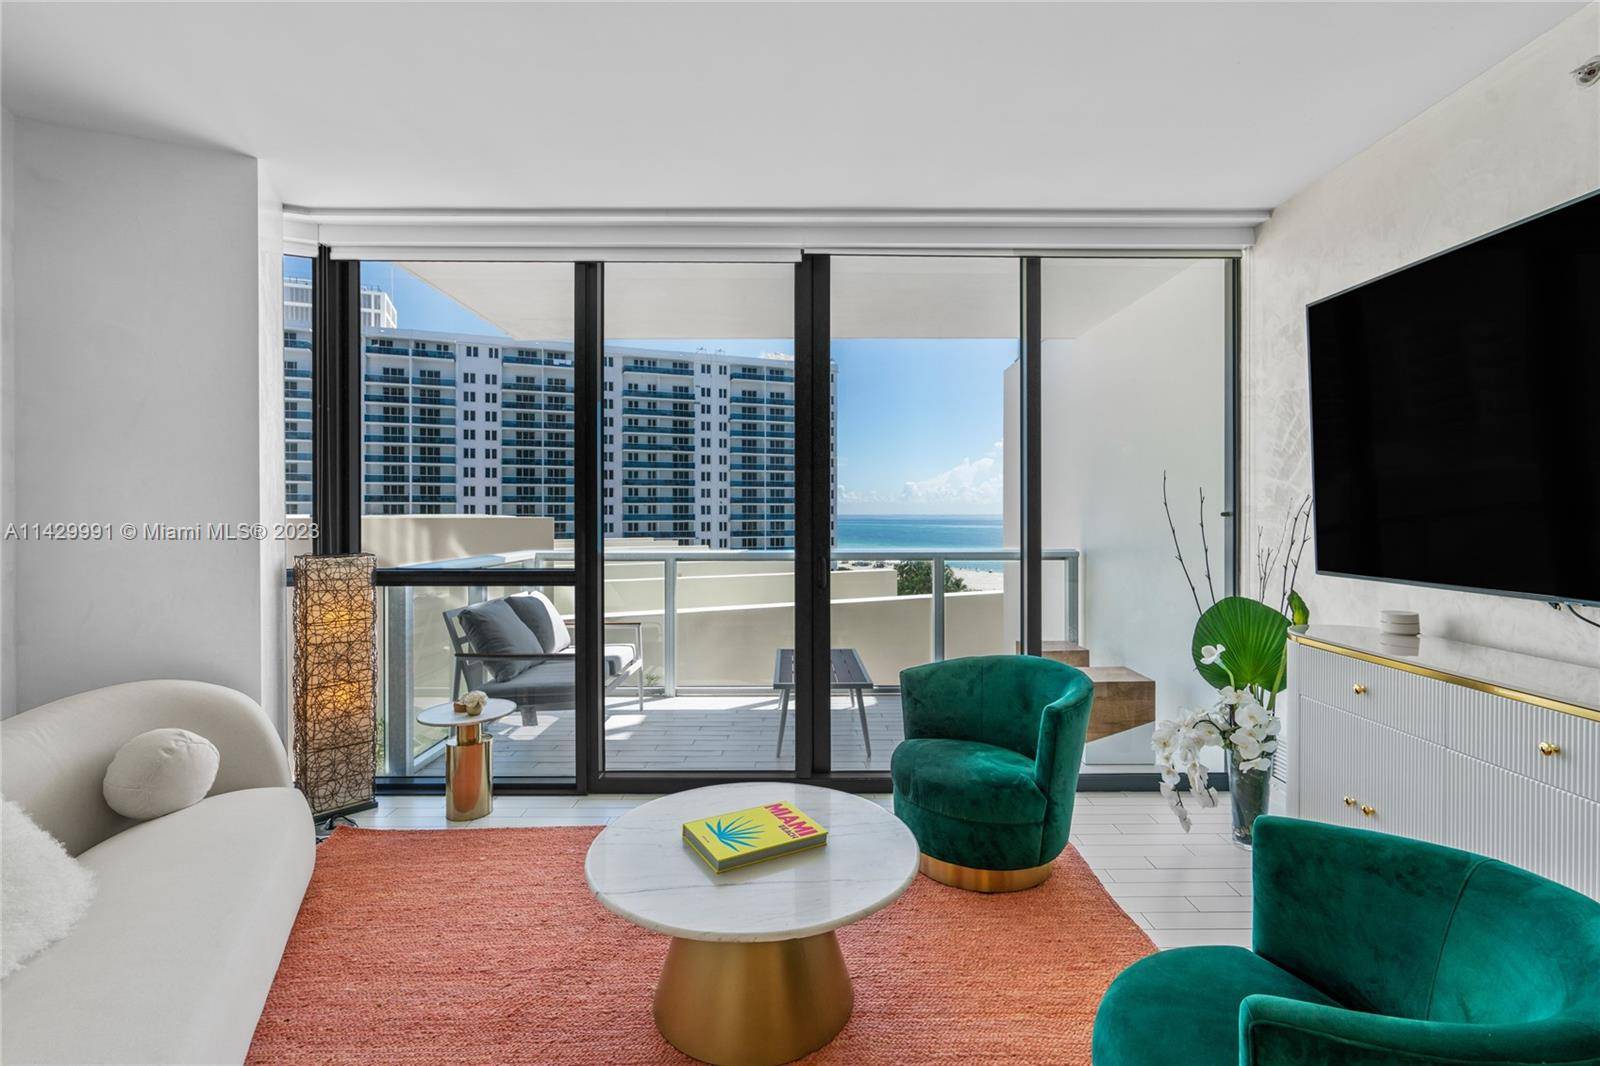 Step into luxury with this remarkable residence at W South Beach.